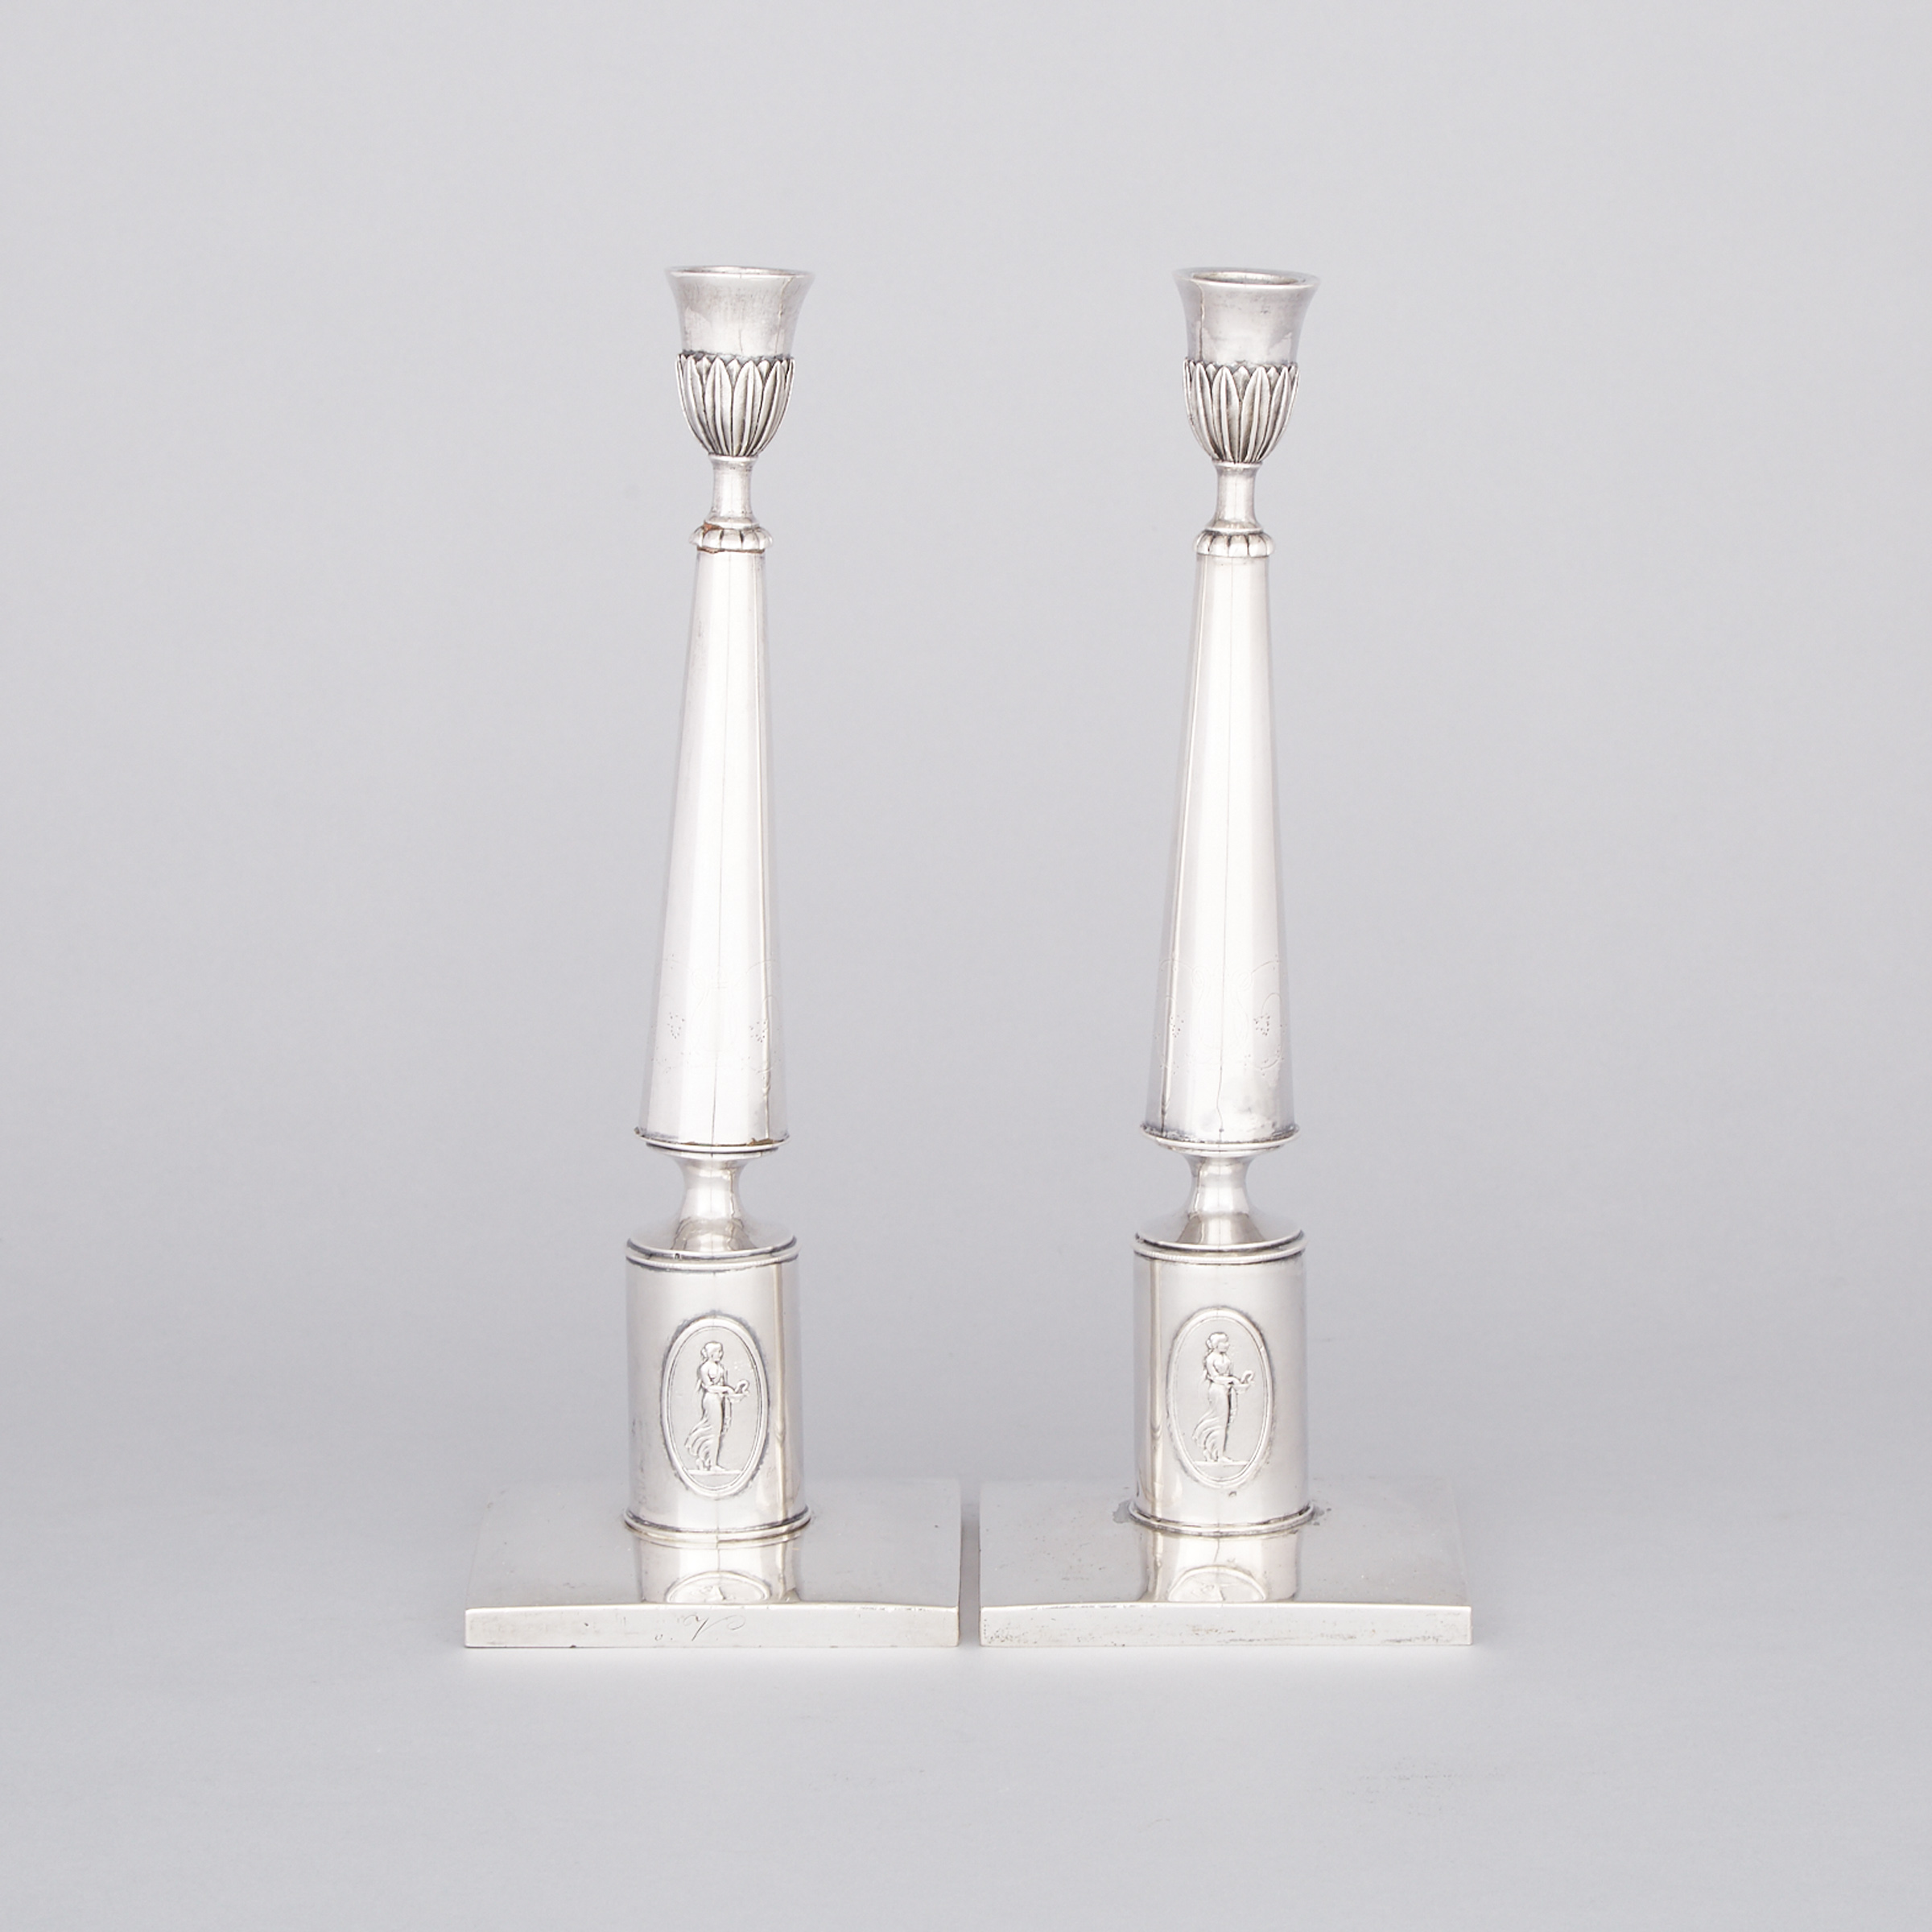 Pair of German Silver Table Candlesticks, Augsburg, 1816